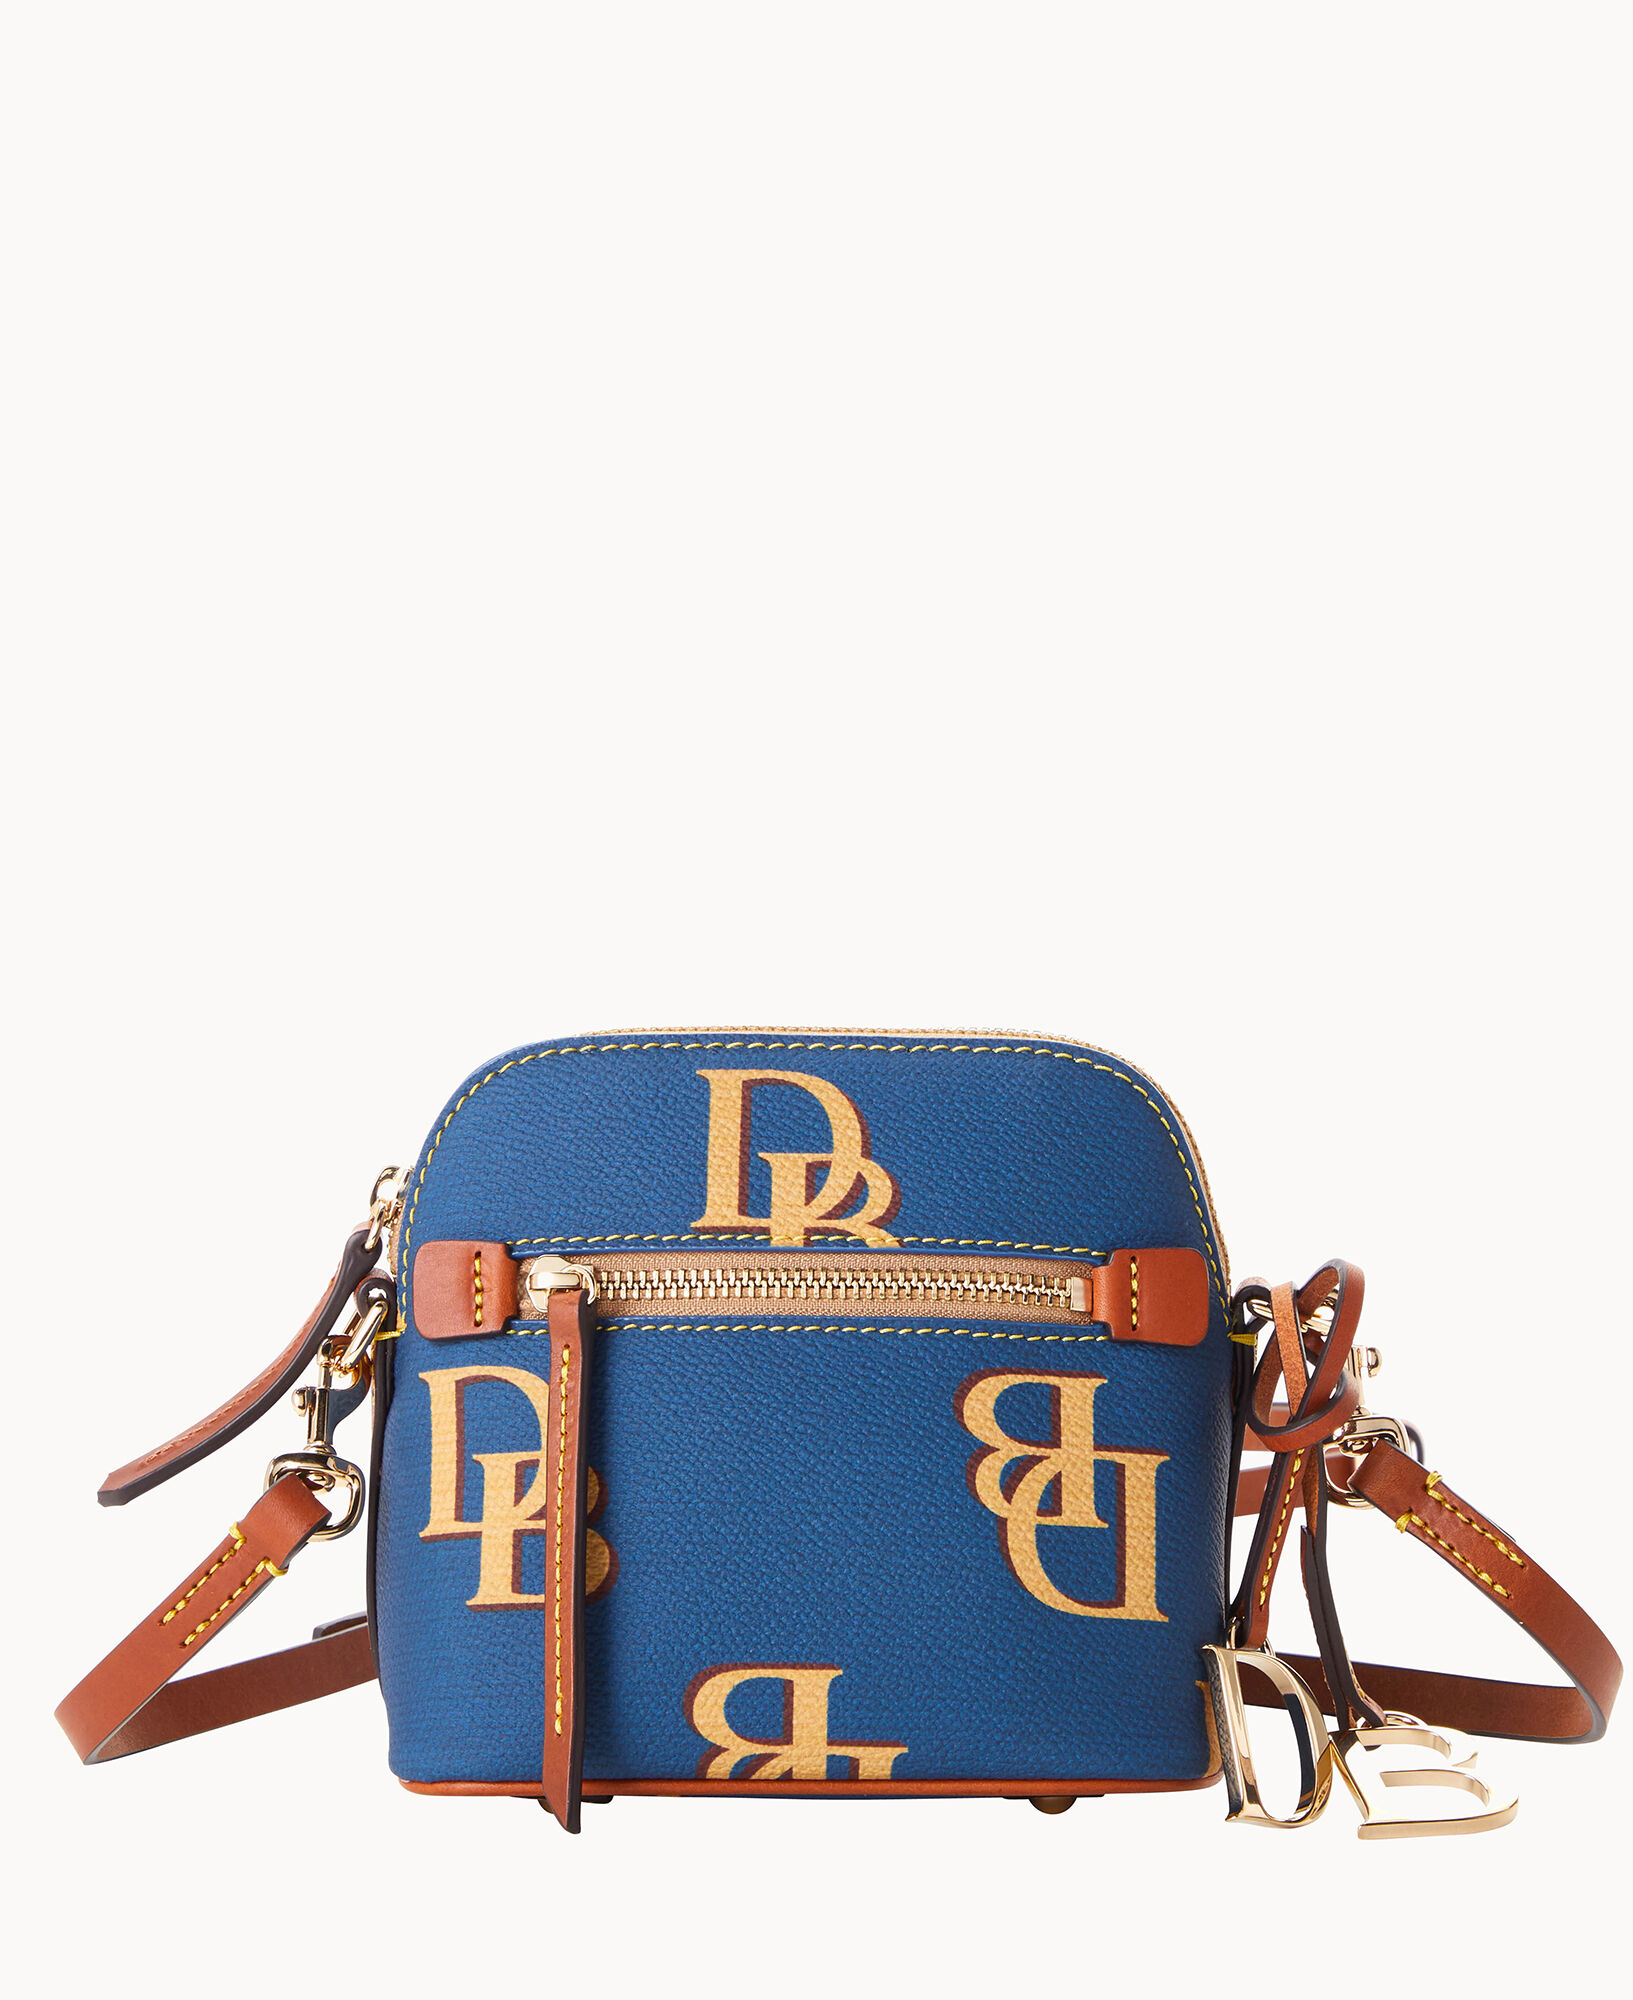 A monogrammed Louis Vuitton bag in all hues (and for many moods)